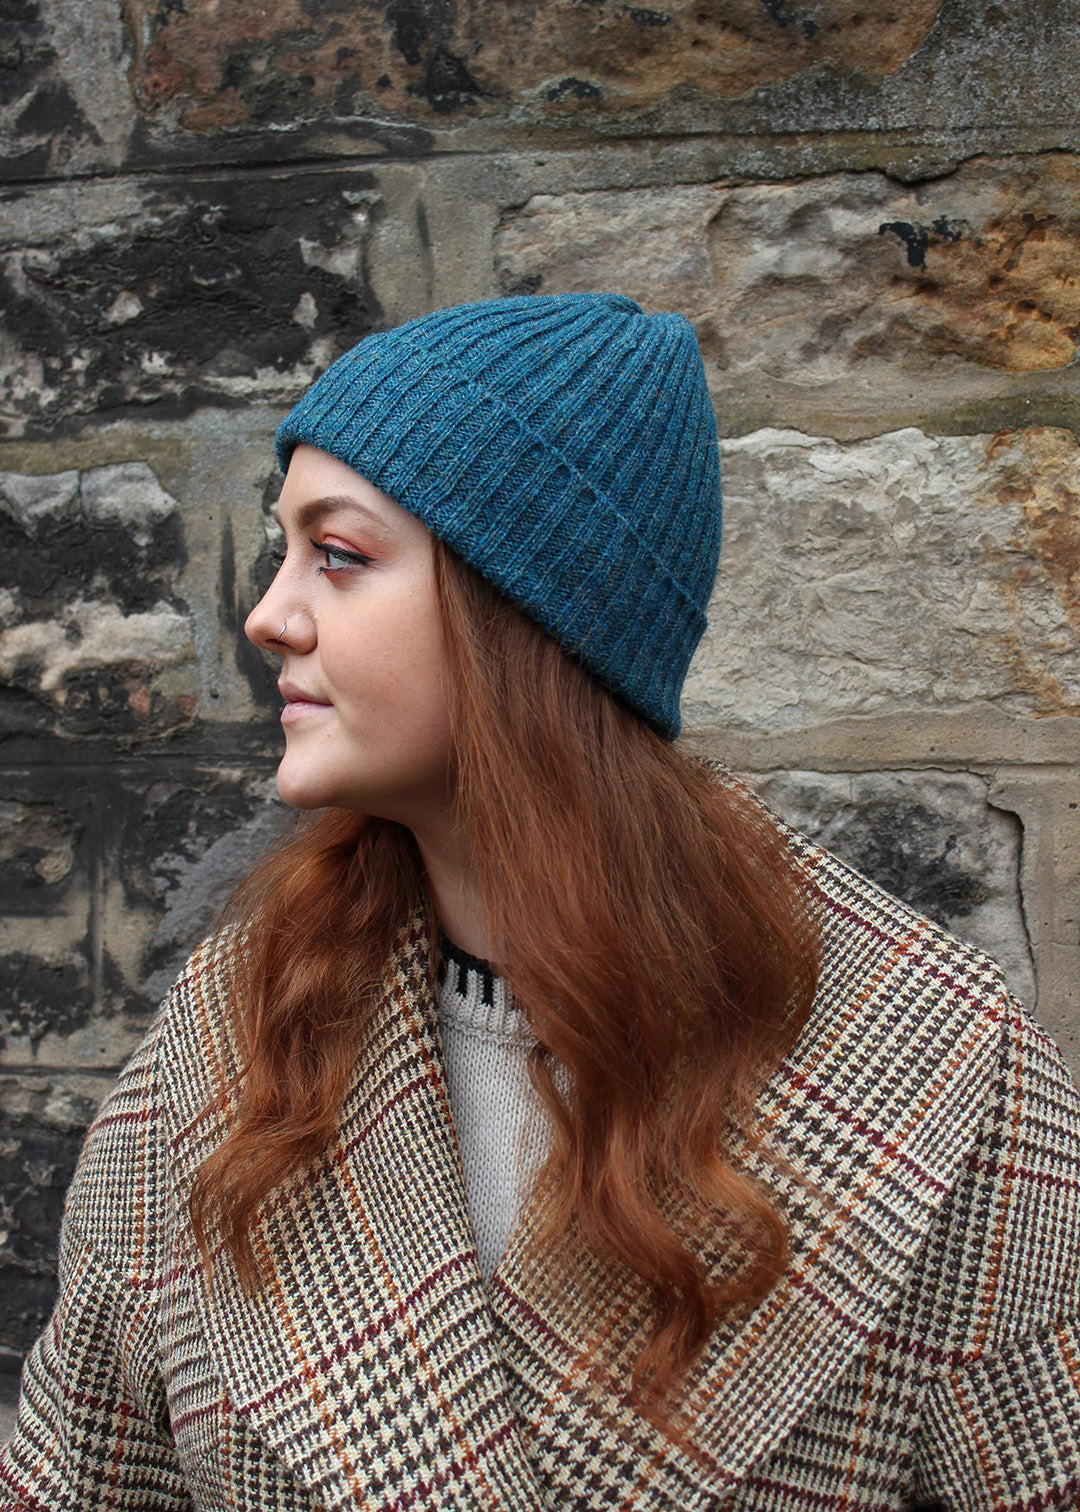 Knitted hat in British Wool Kingfisher Teal. Scottish Textiles Showcase.